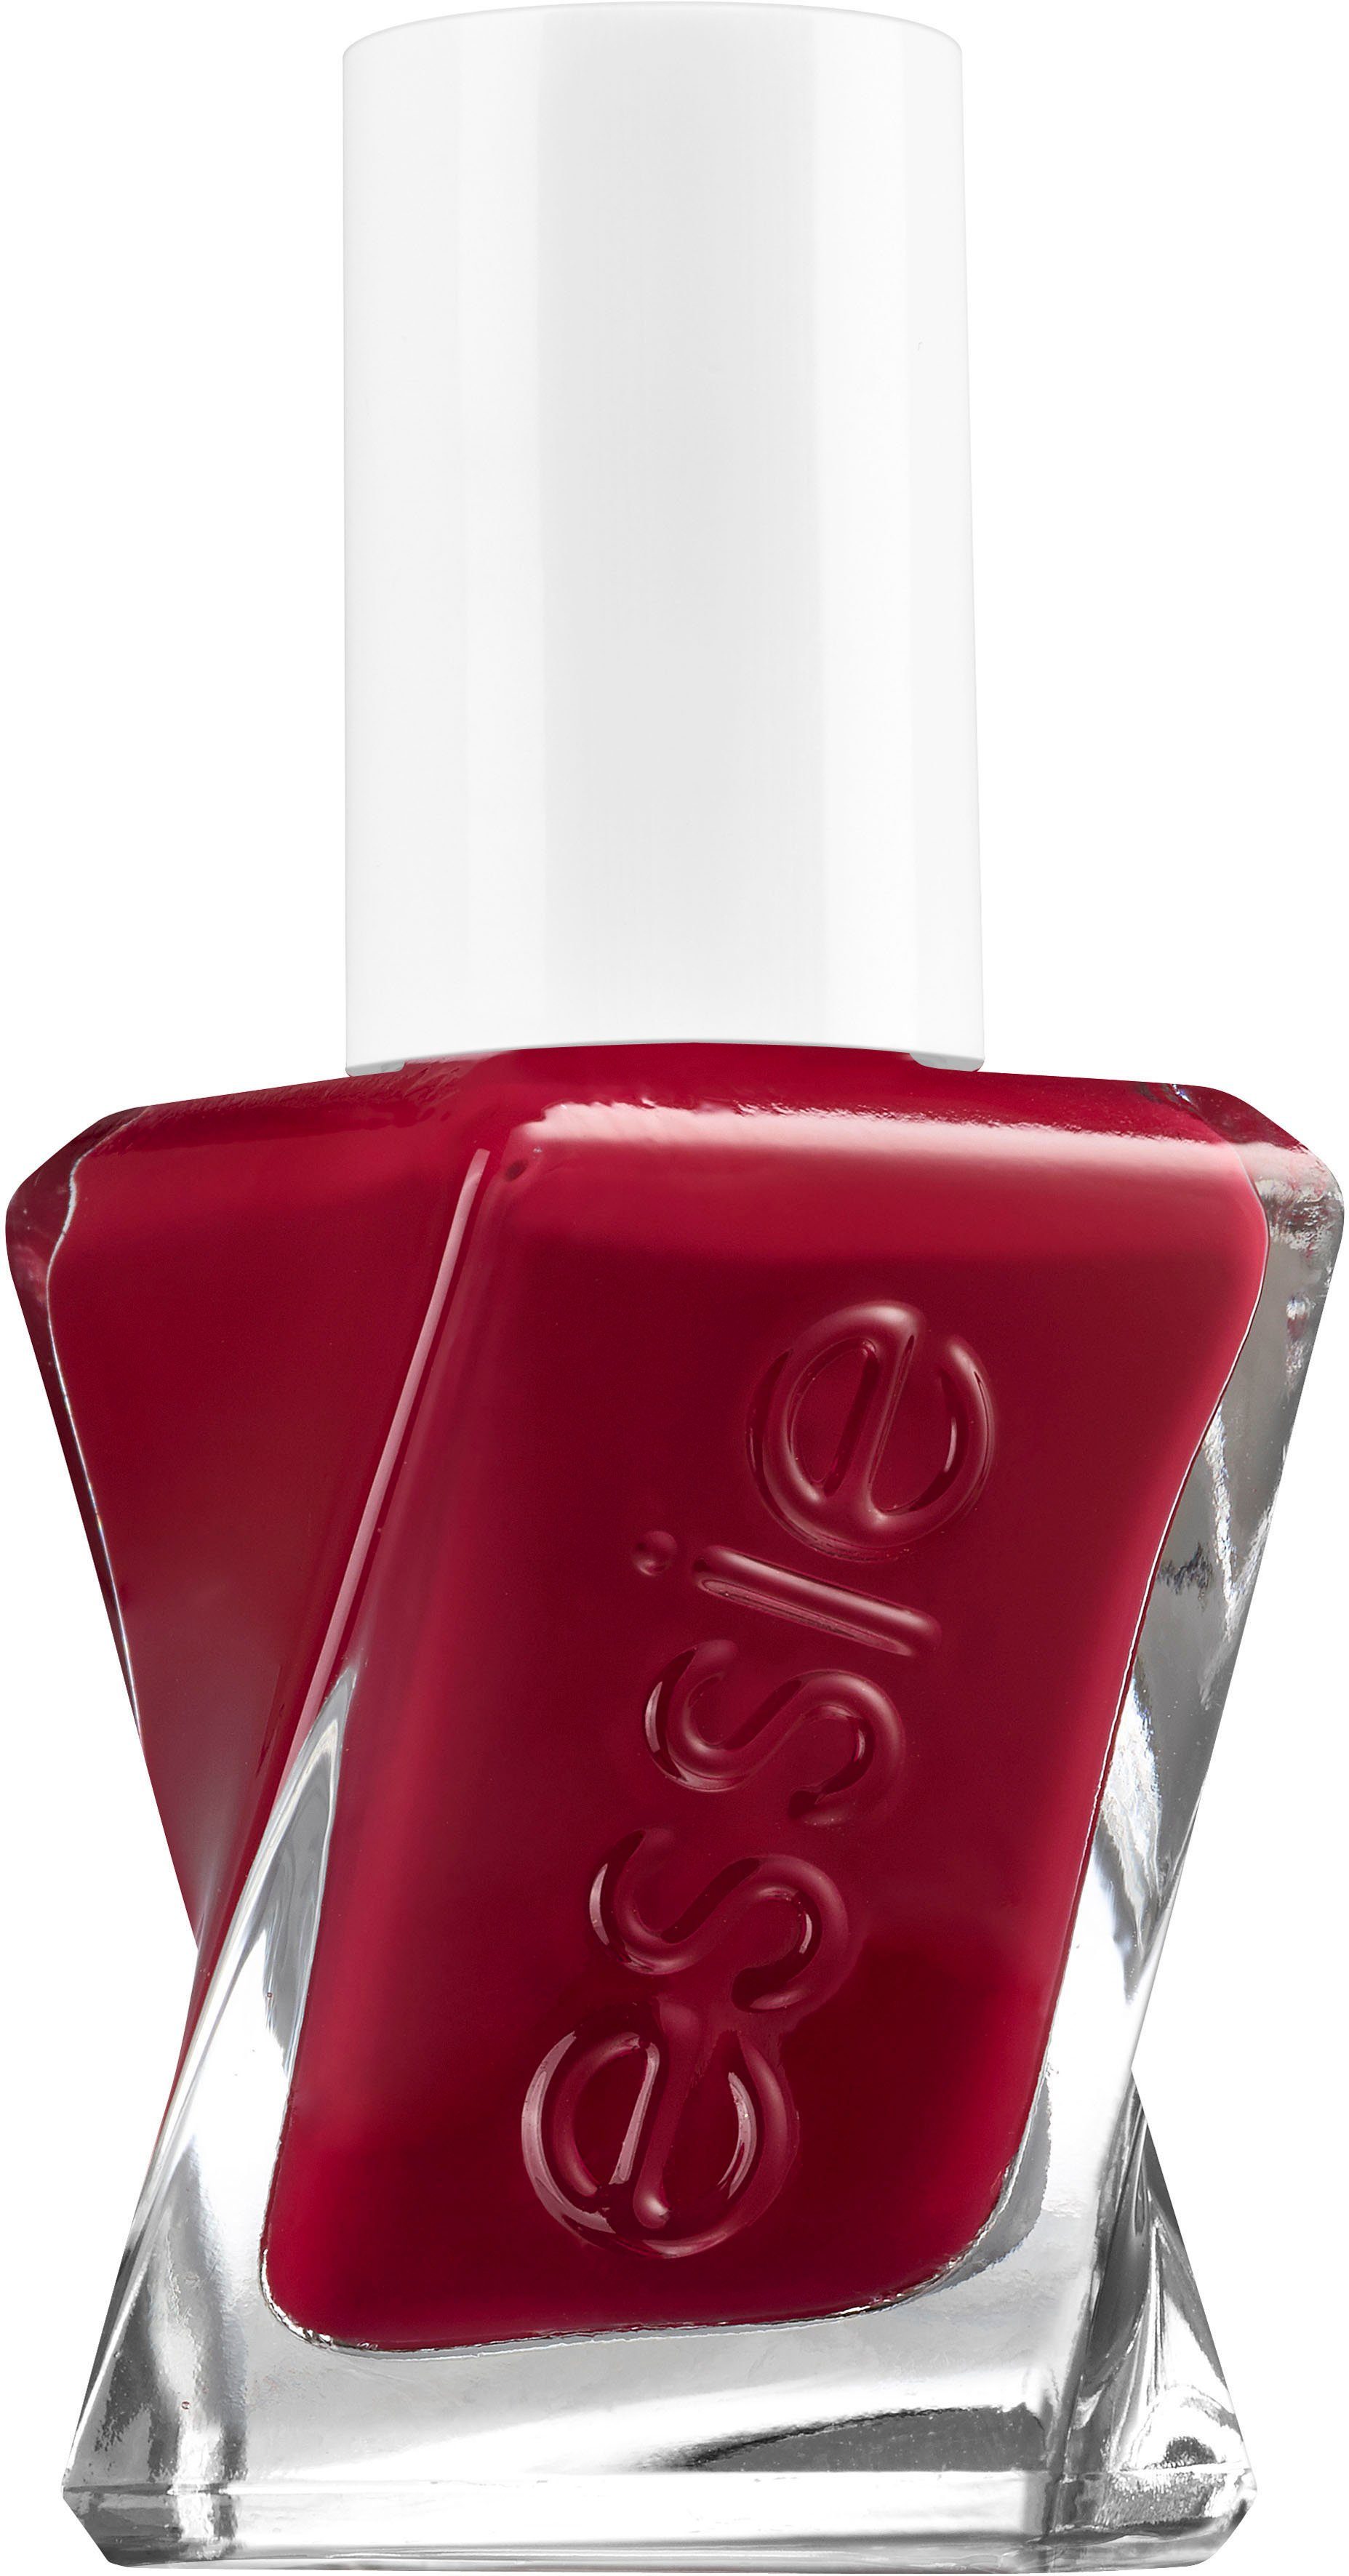 Paint gown Gel red Nr. the Couture 509 Gel-Nagellack essie Rot